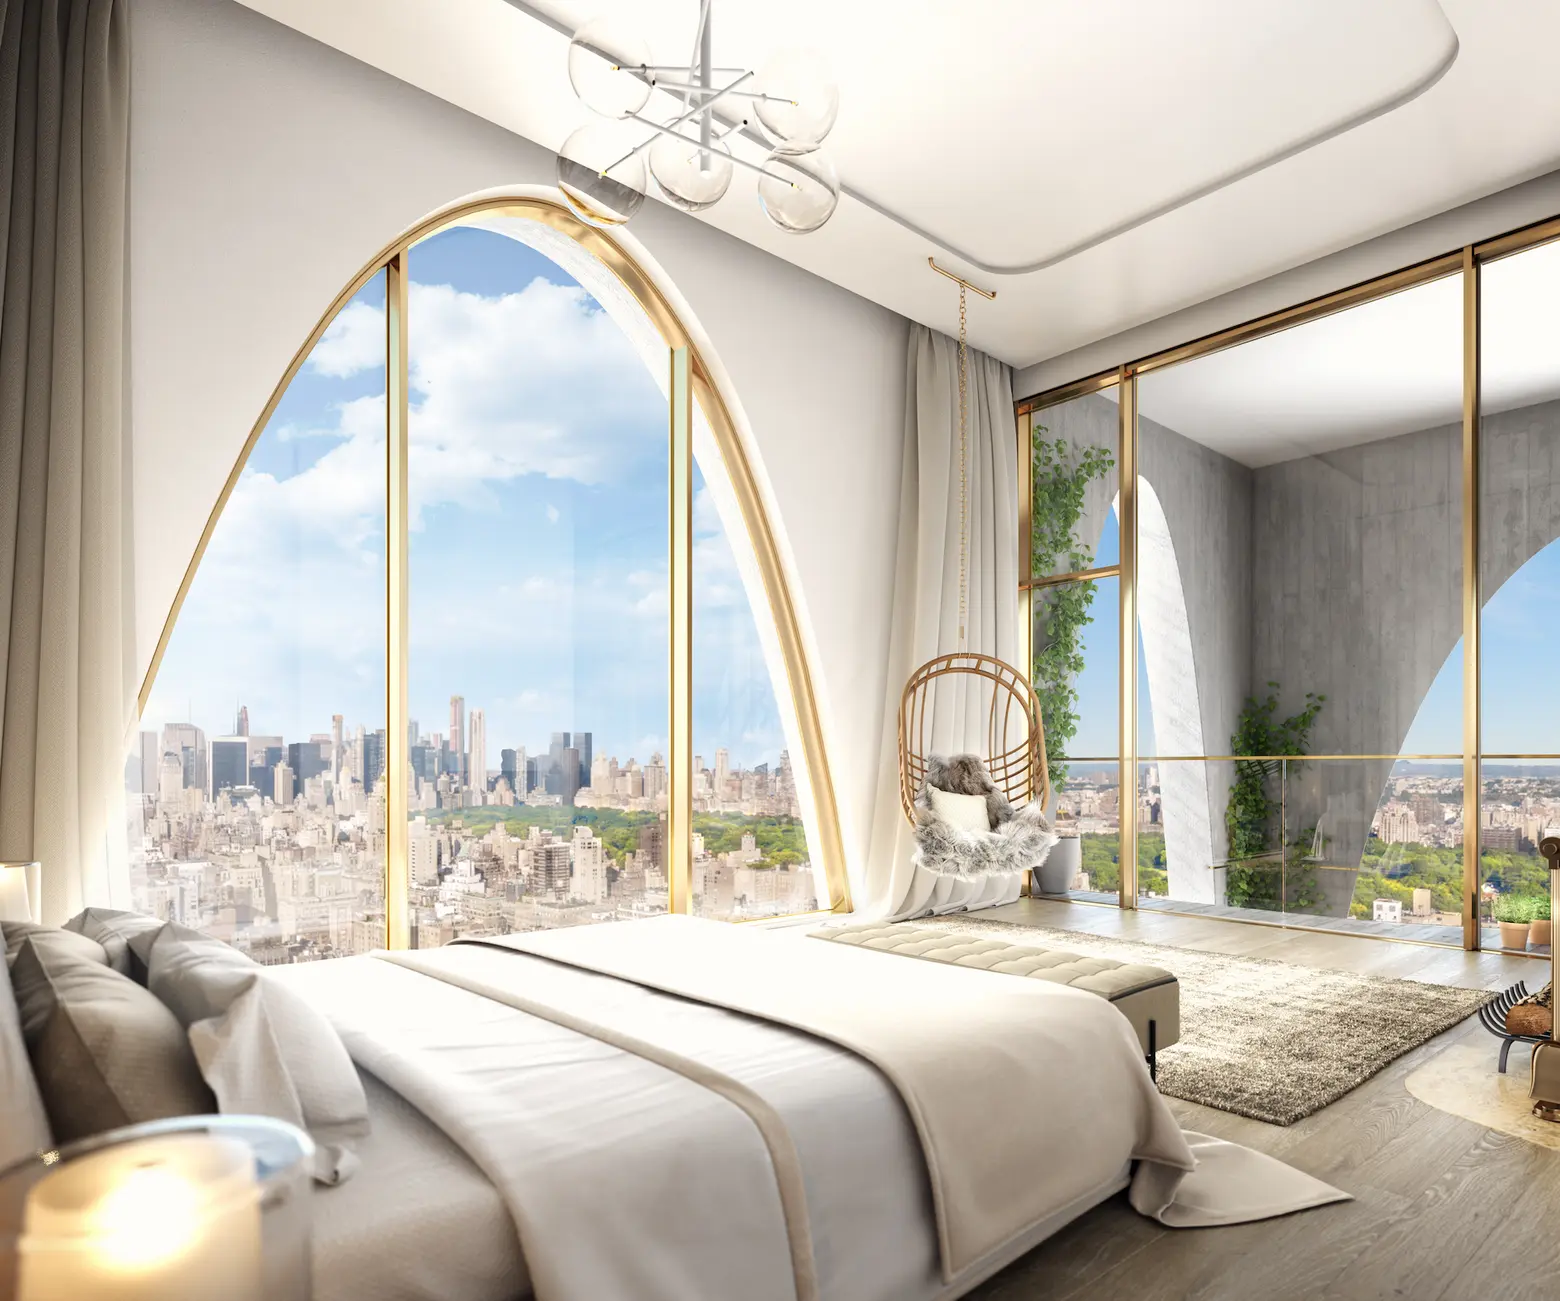 Asking $33M, the tallest penthouse on the UES has dramatic archways and three levels of terraces